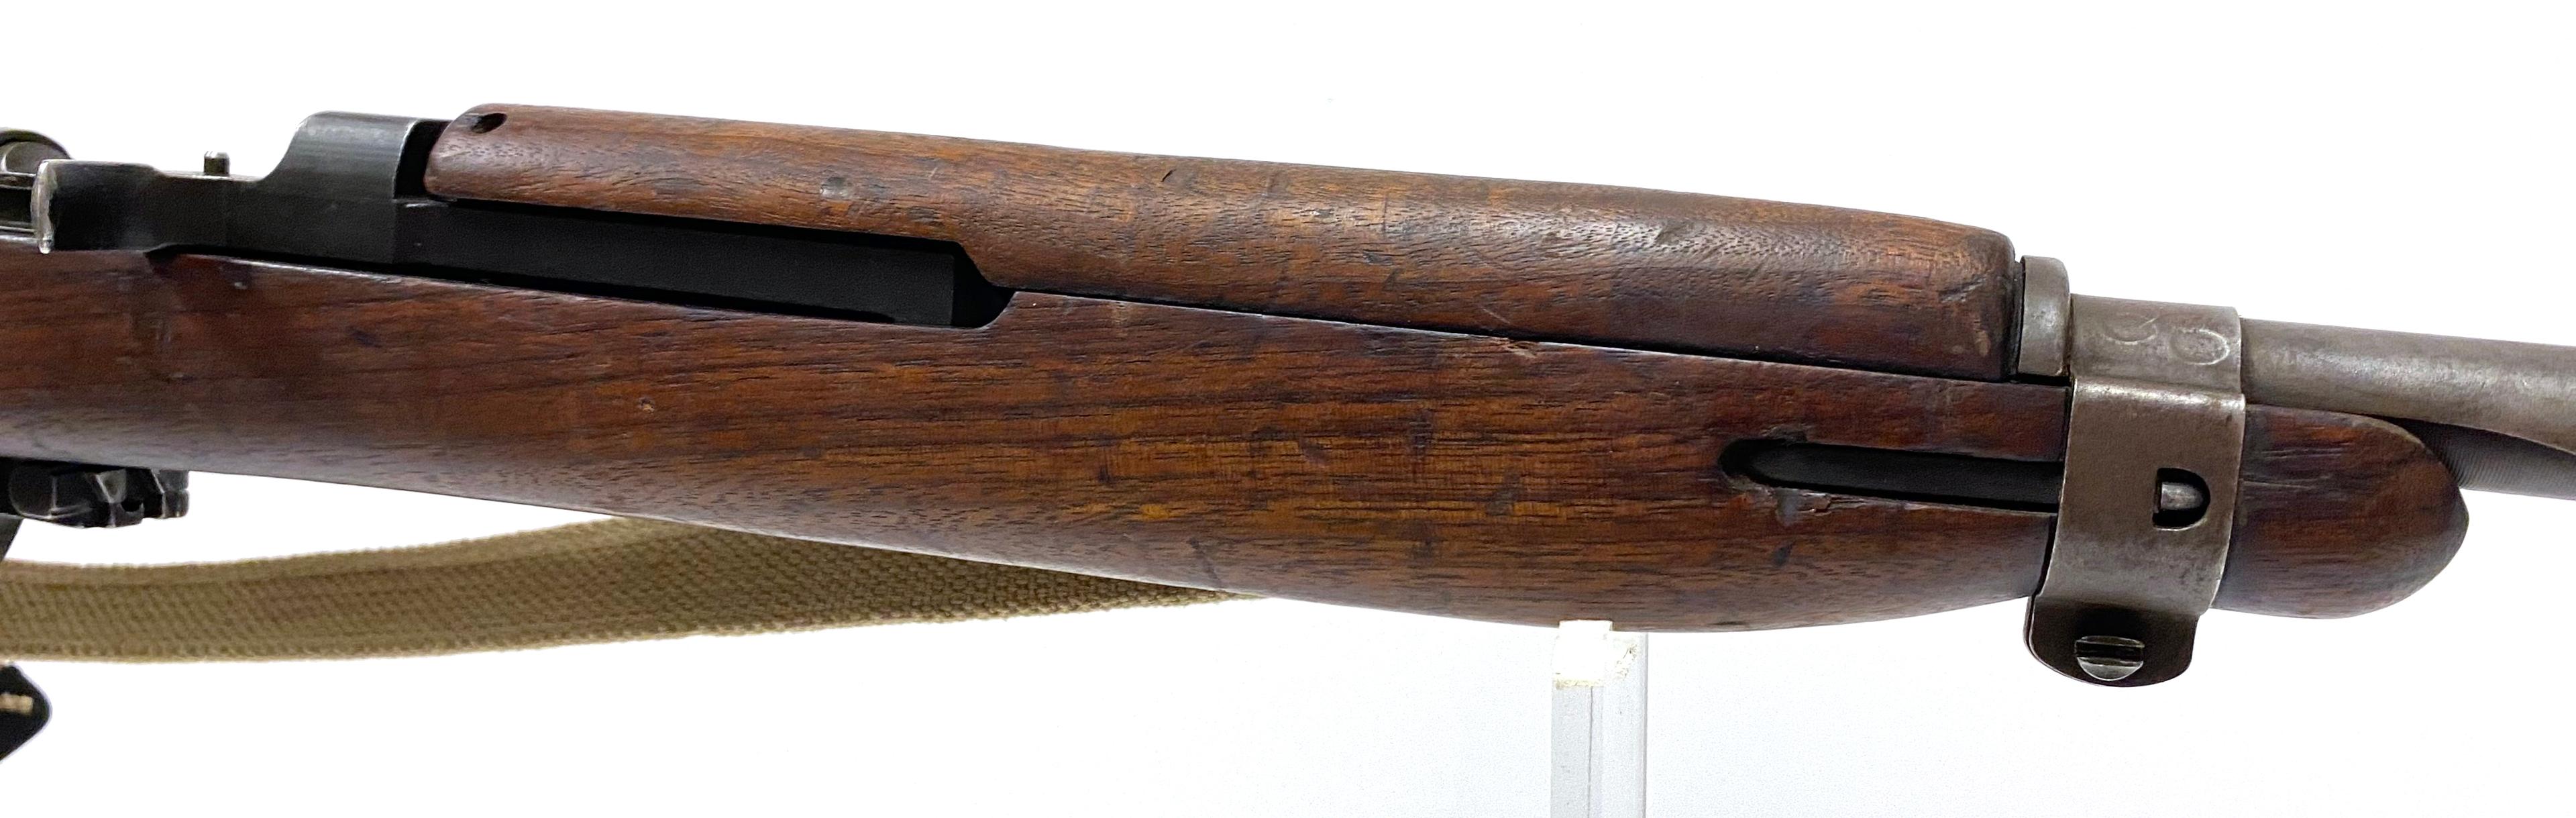 1943 WWII Underwood M1 Carbine .30 Cal. Semi-Automatic Rifle with Sling, Mag Pouch, & 2 Mags